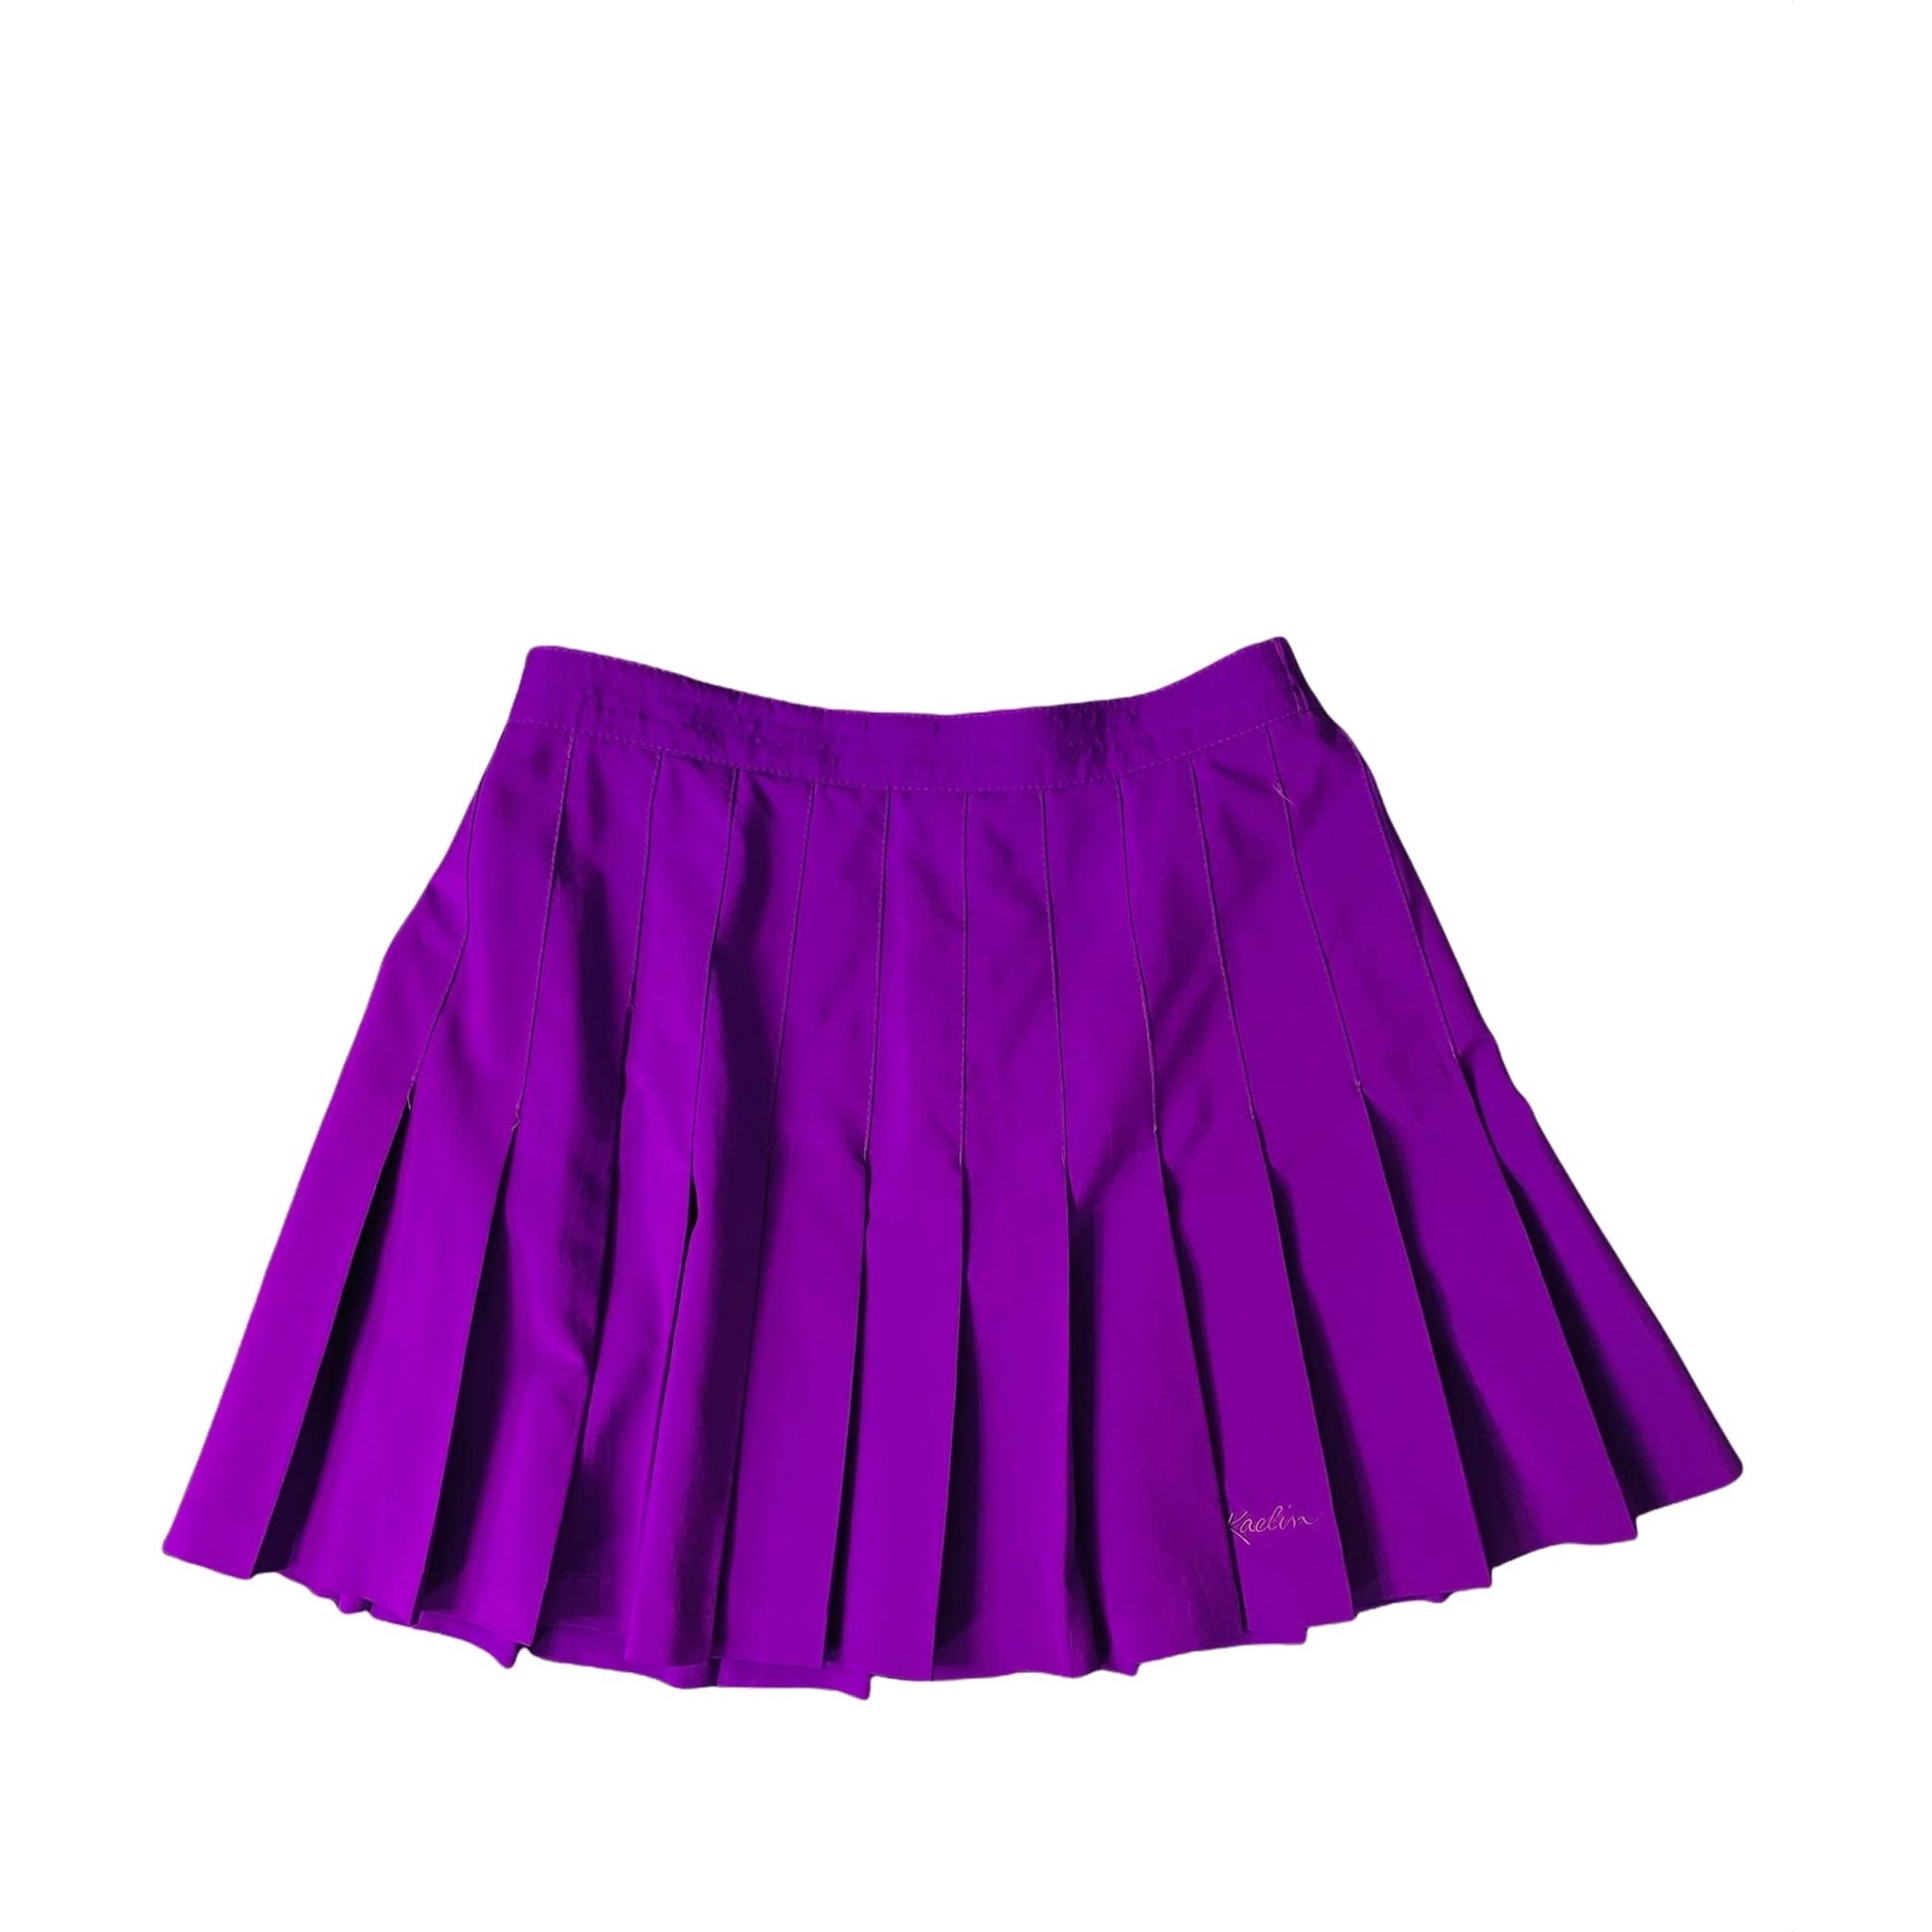 Skorts' and tennis skirts are back! Get in on this season's throwback trend  - Good Morning America